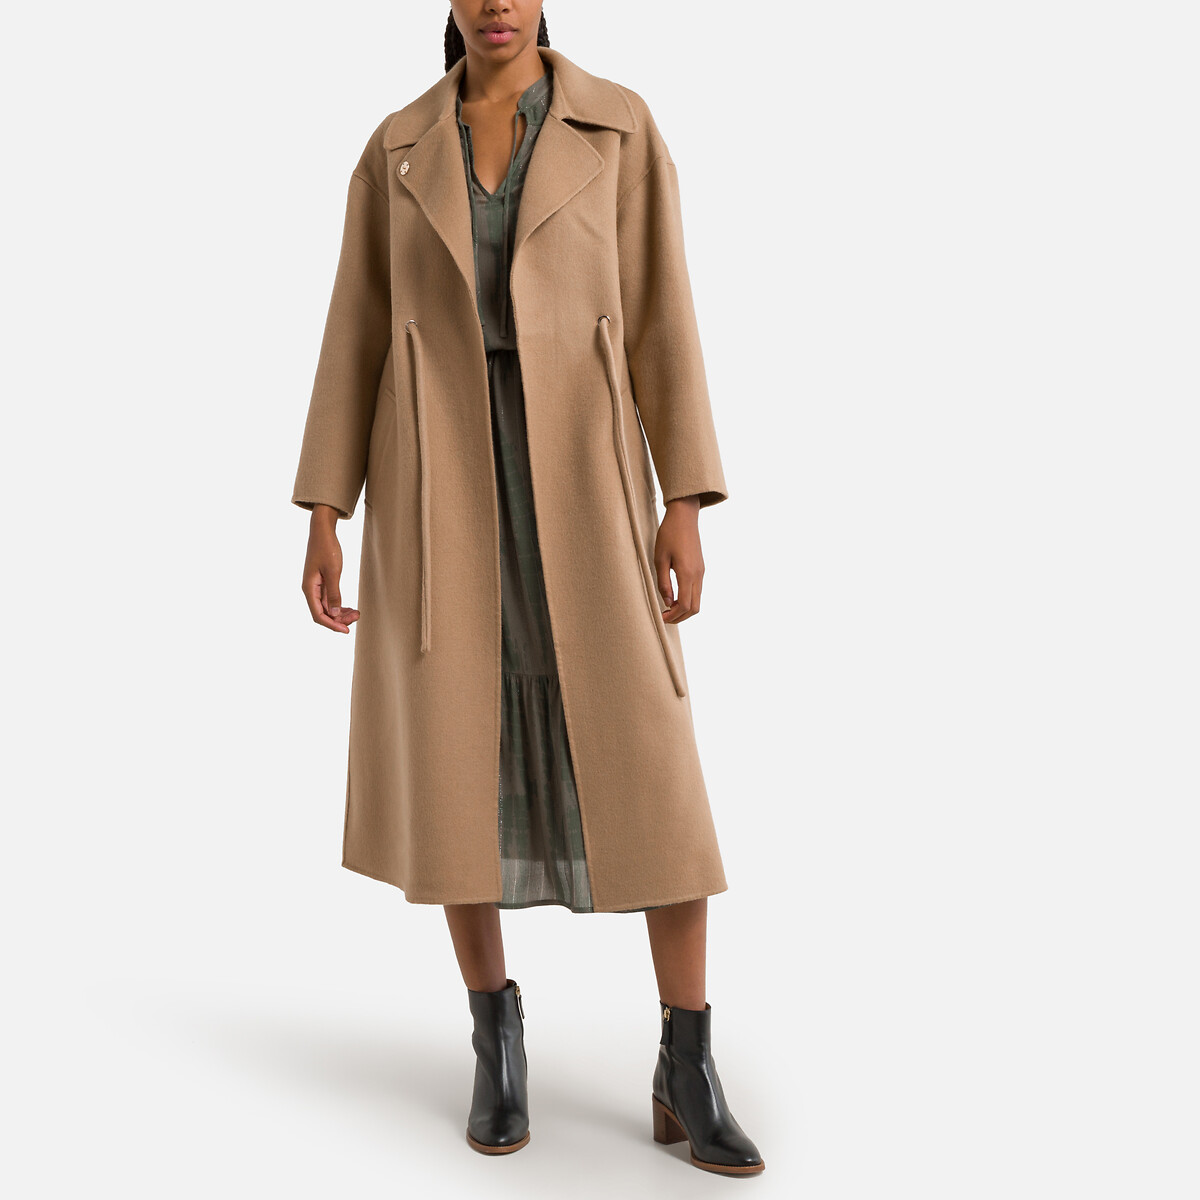 Kate Wool Mix Coat with Tie-Waist